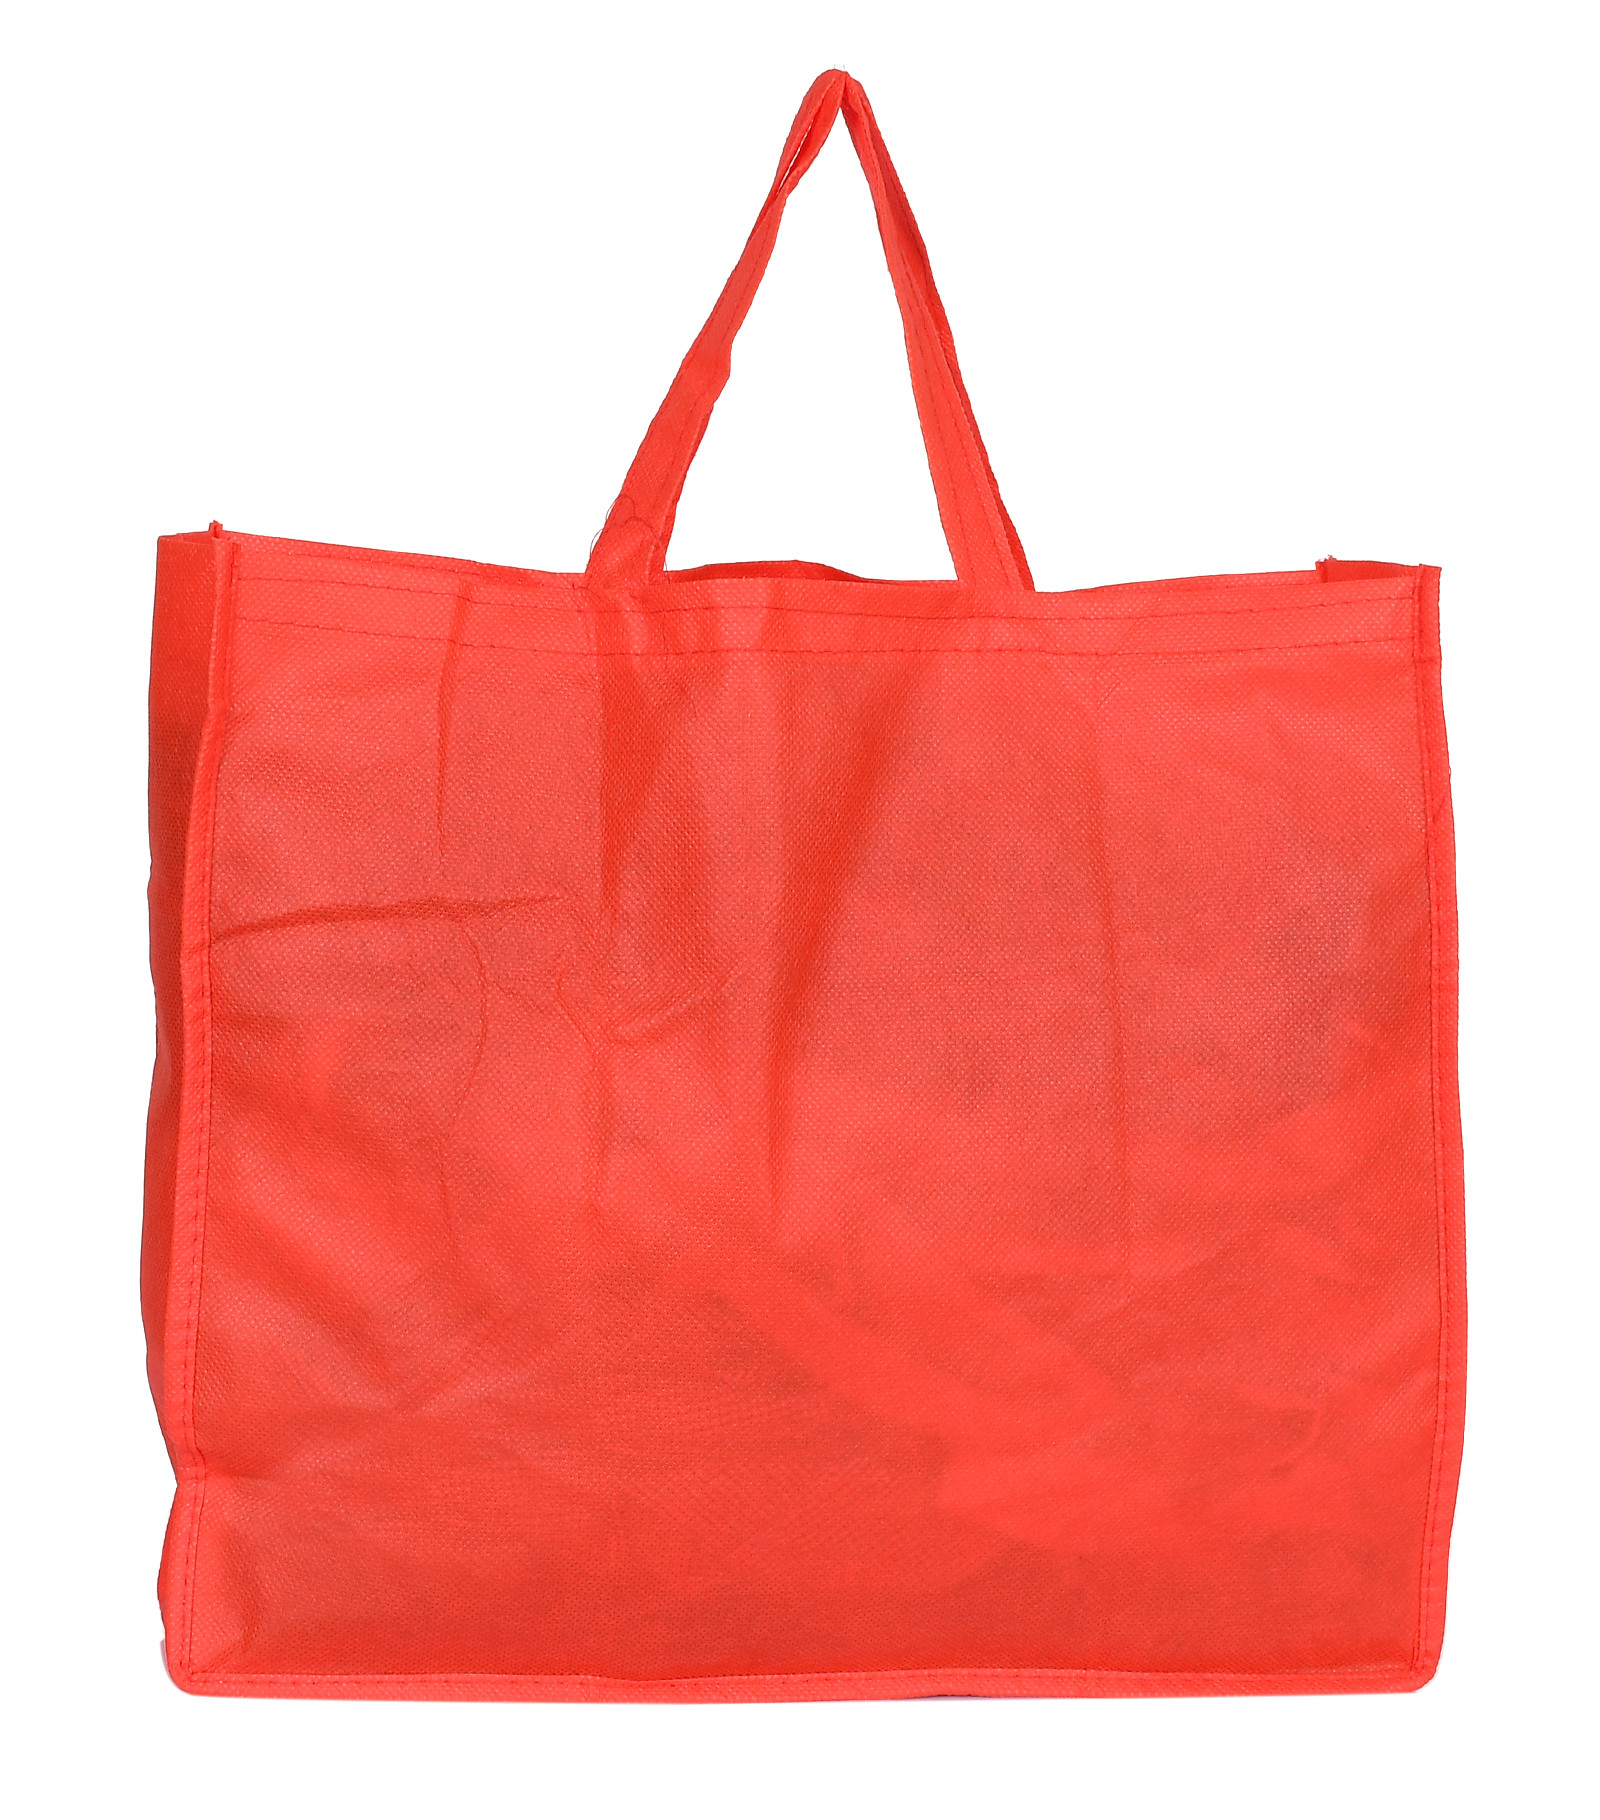 Kuber Industries Shopping Grocery Bags Foldable, Washable Grocery Tote Bag with One Small Pocket, Eco-Friendly Purse Bag Fits in Pocket Waterproof & Lightweight (Orange & Pink & Red)